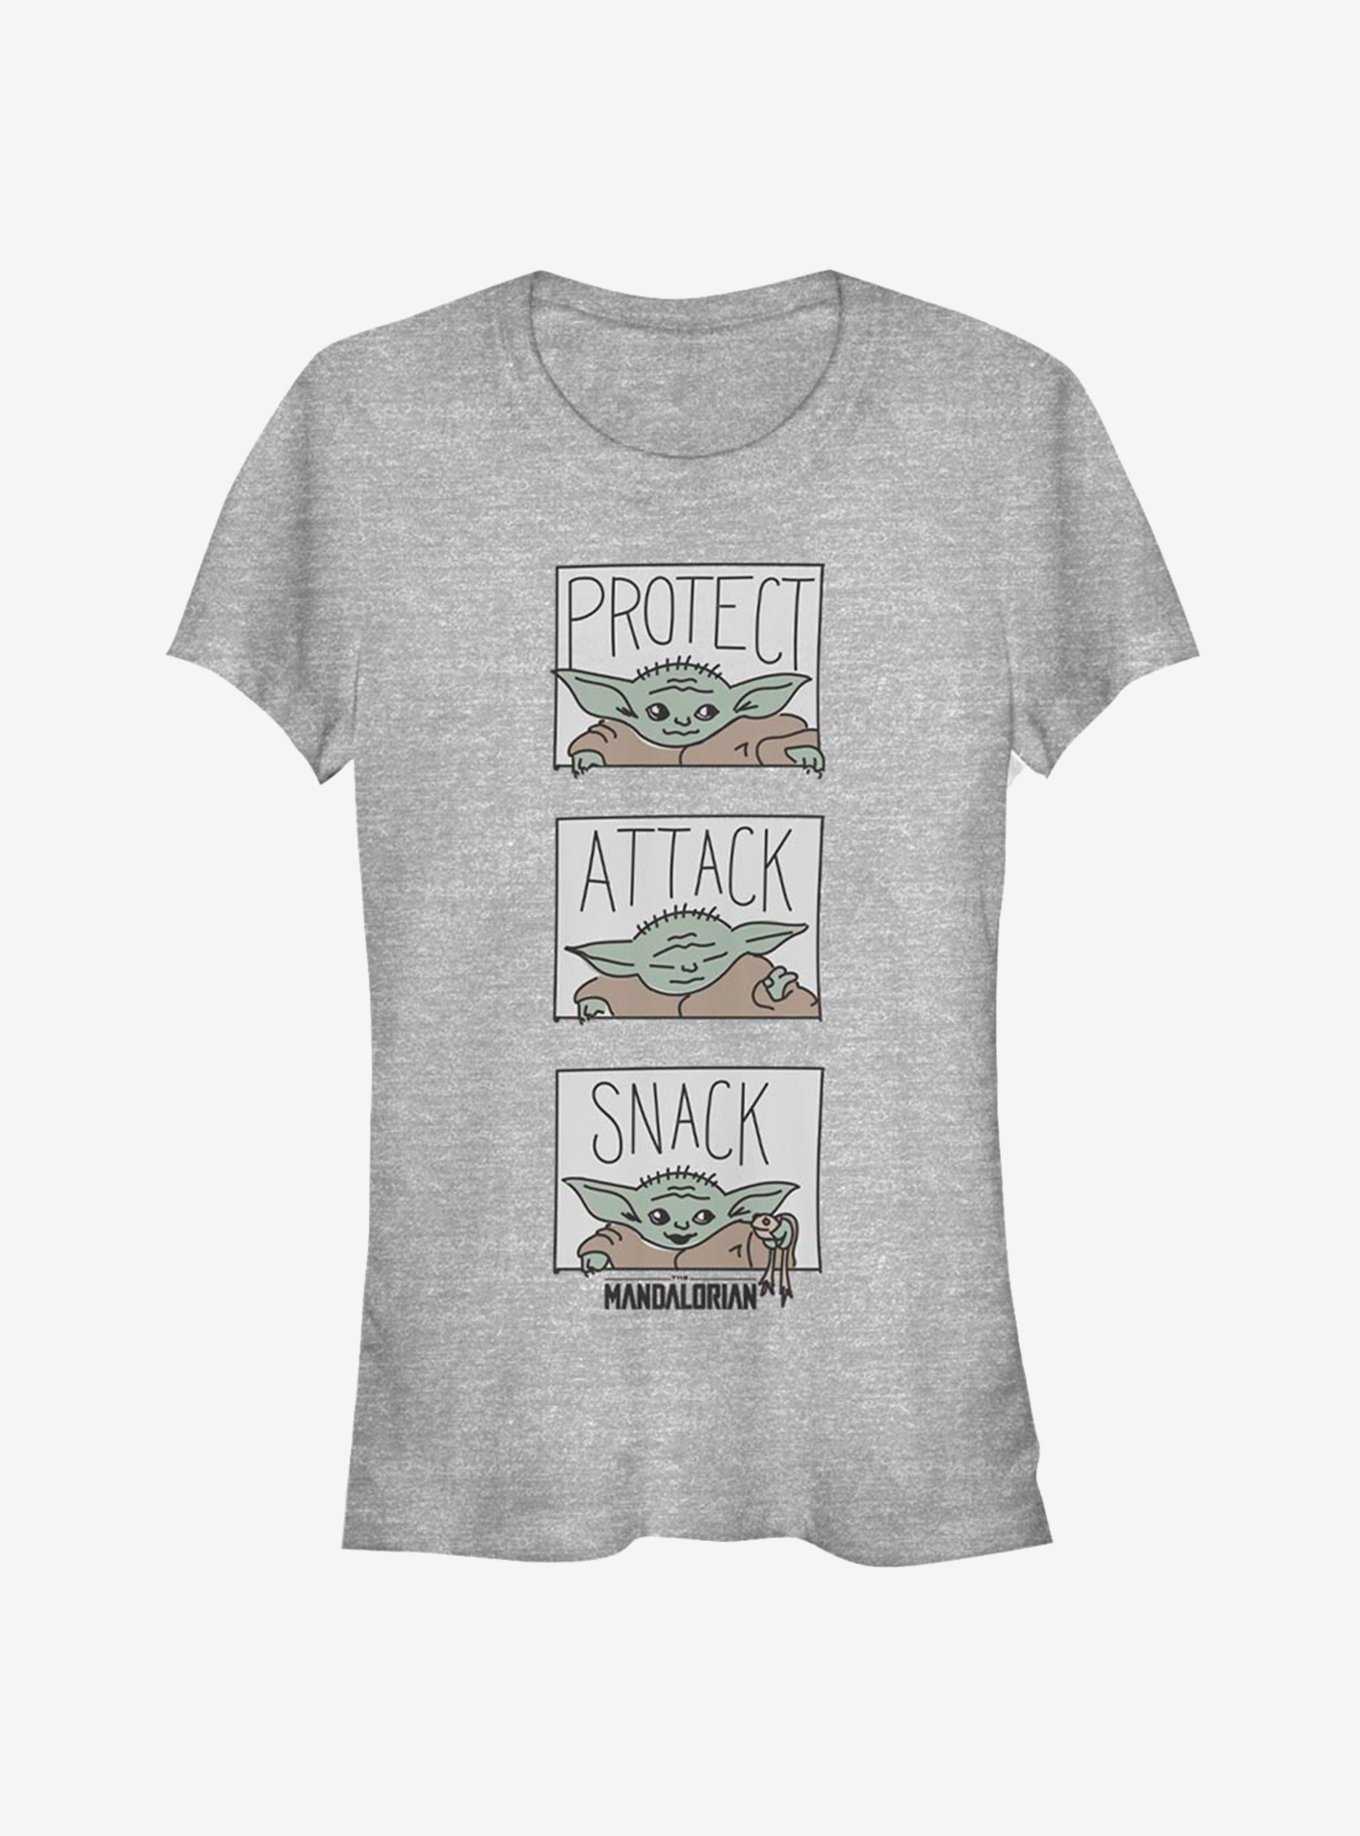 Star Wars The Mandalorian The Child Protect Attack Snack Girls T-Shirt, , hi-res